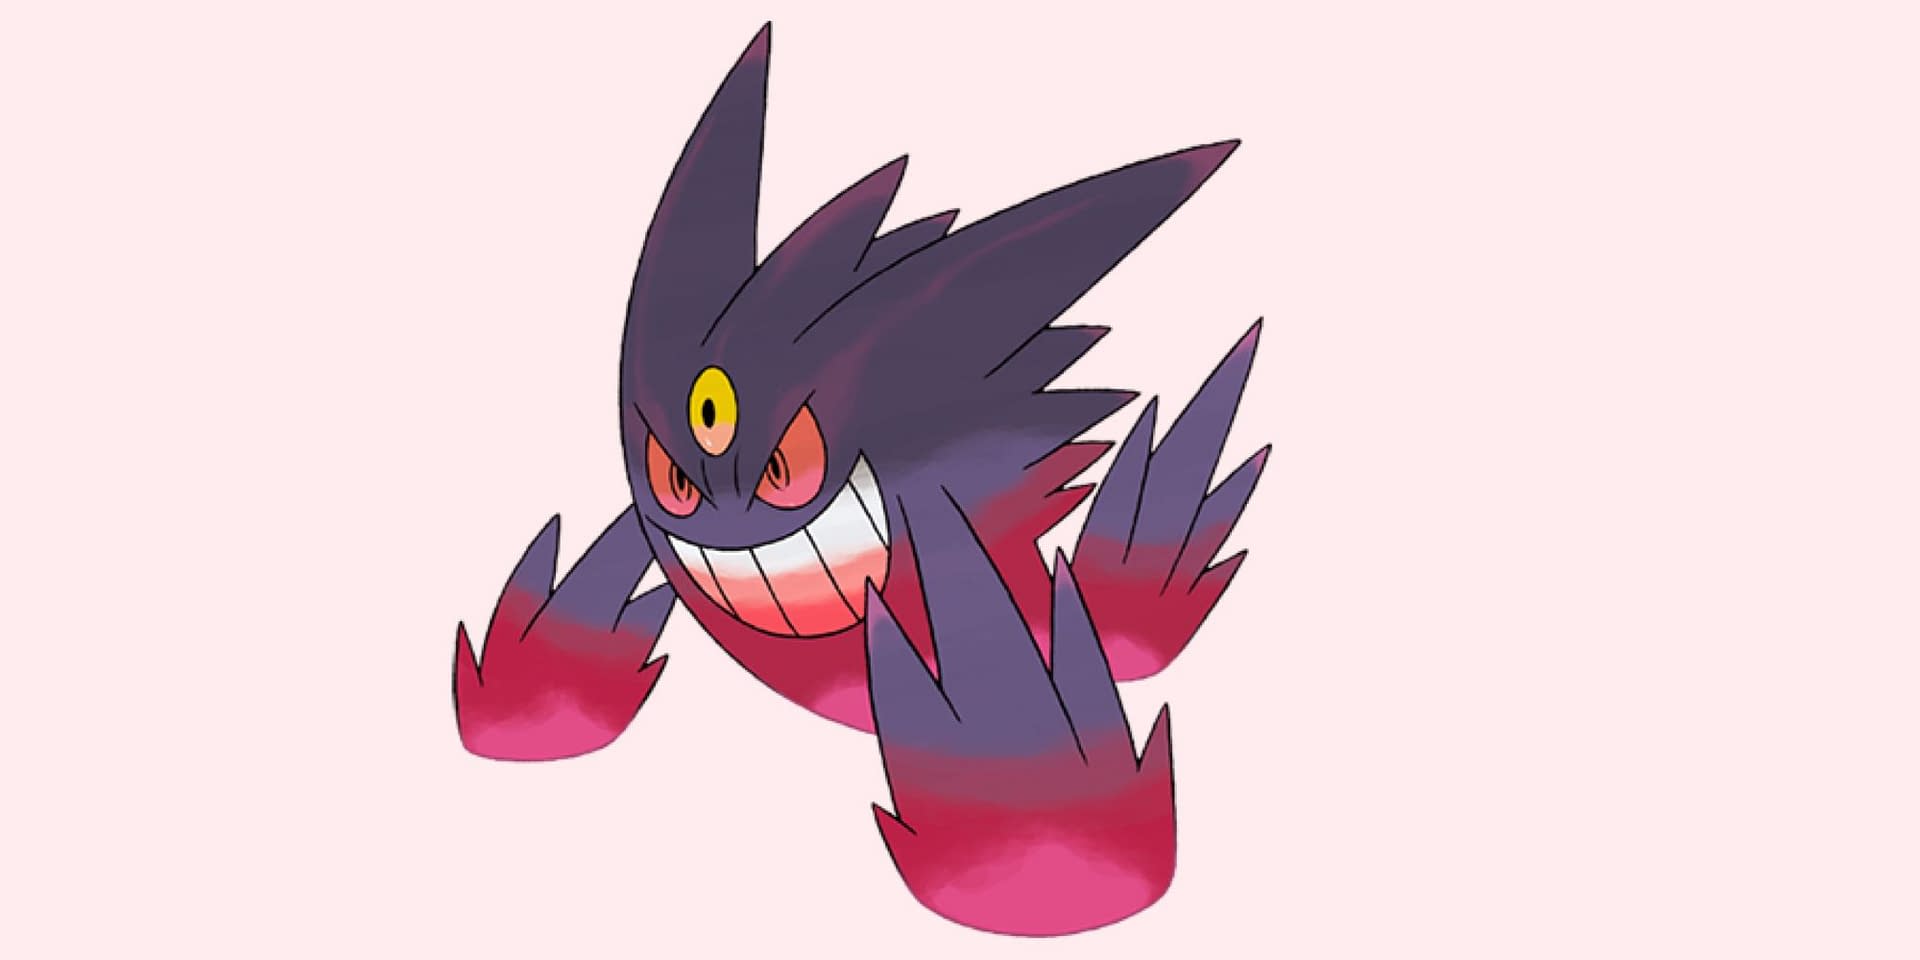 Every Gengar Card, Ranked by How Easy it Was to Draw